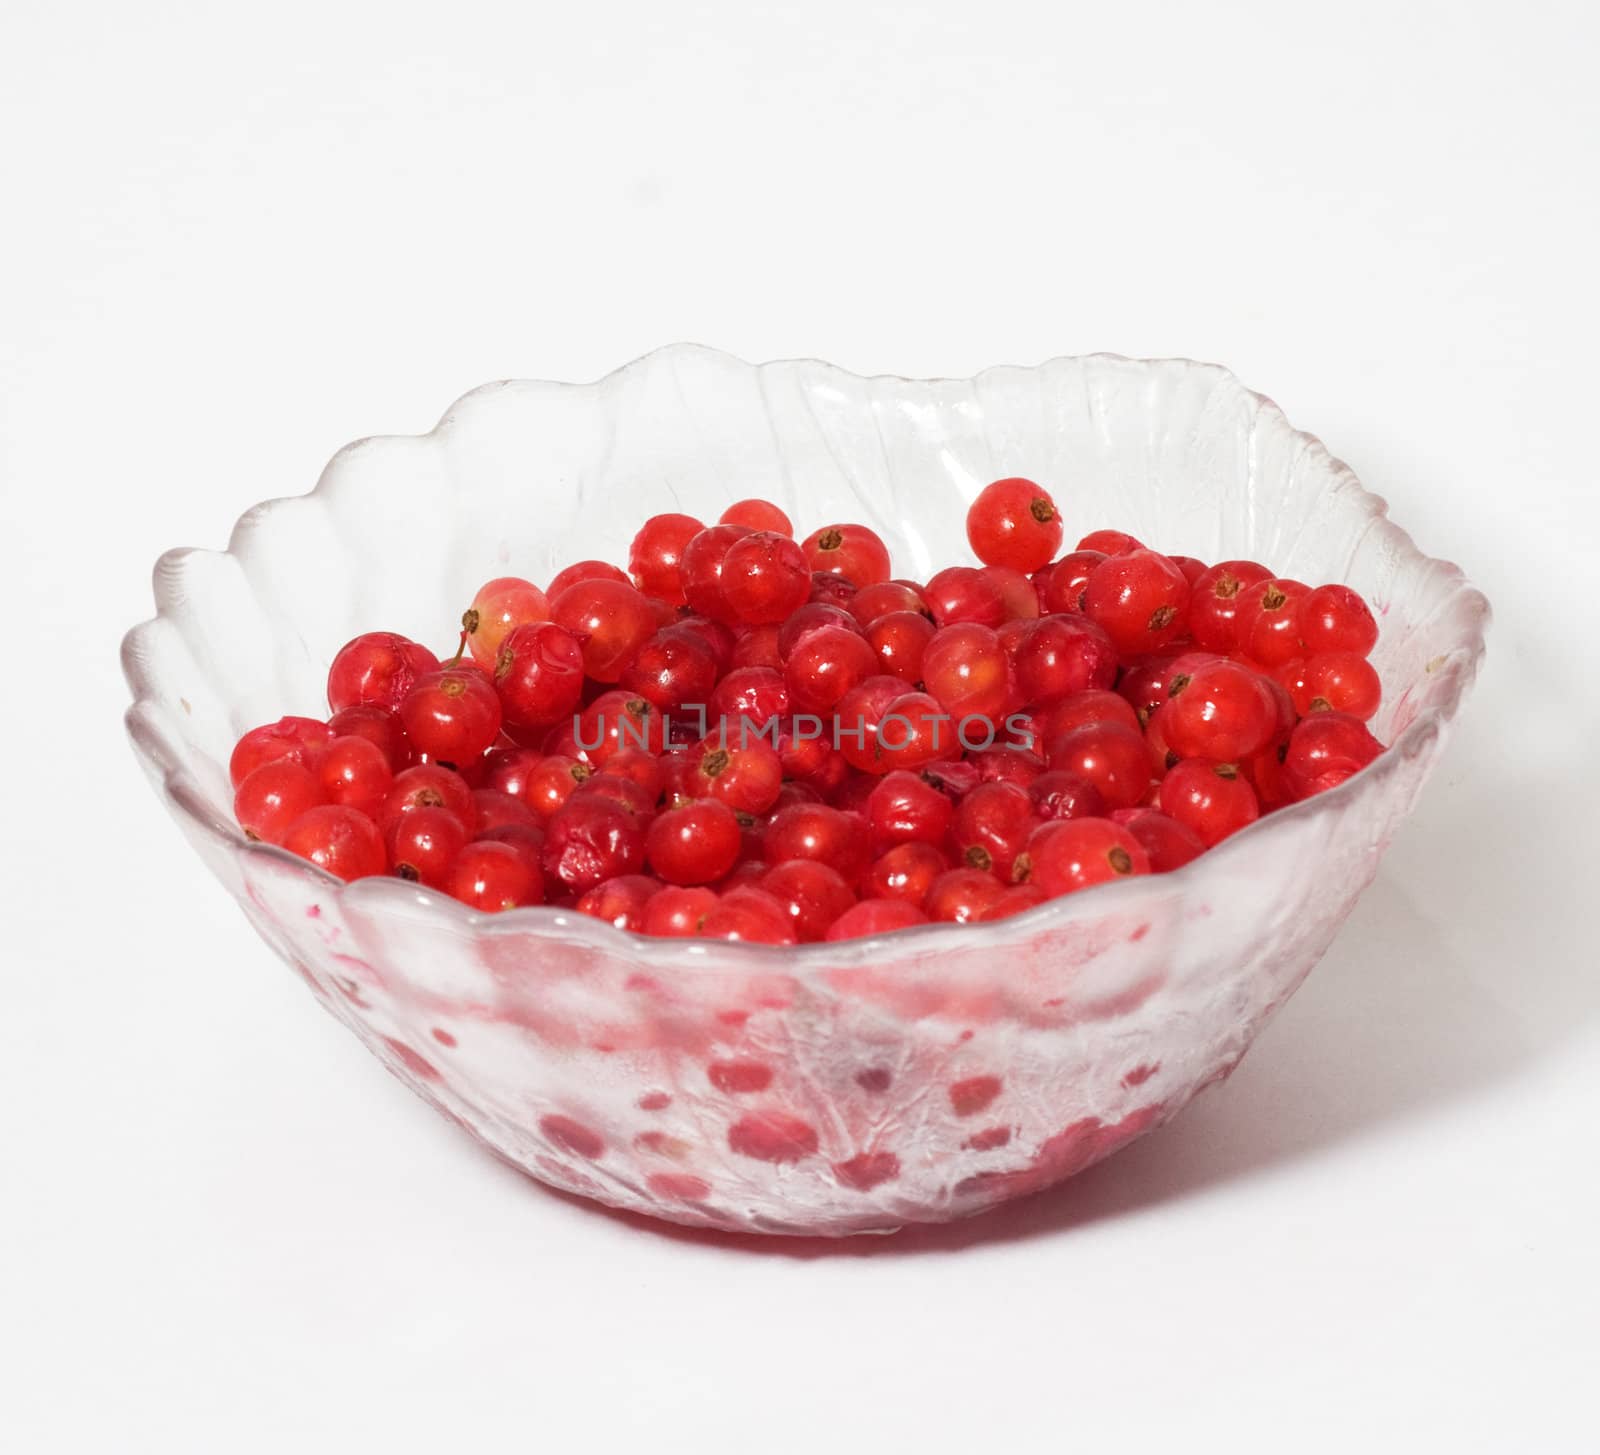 Red currant 